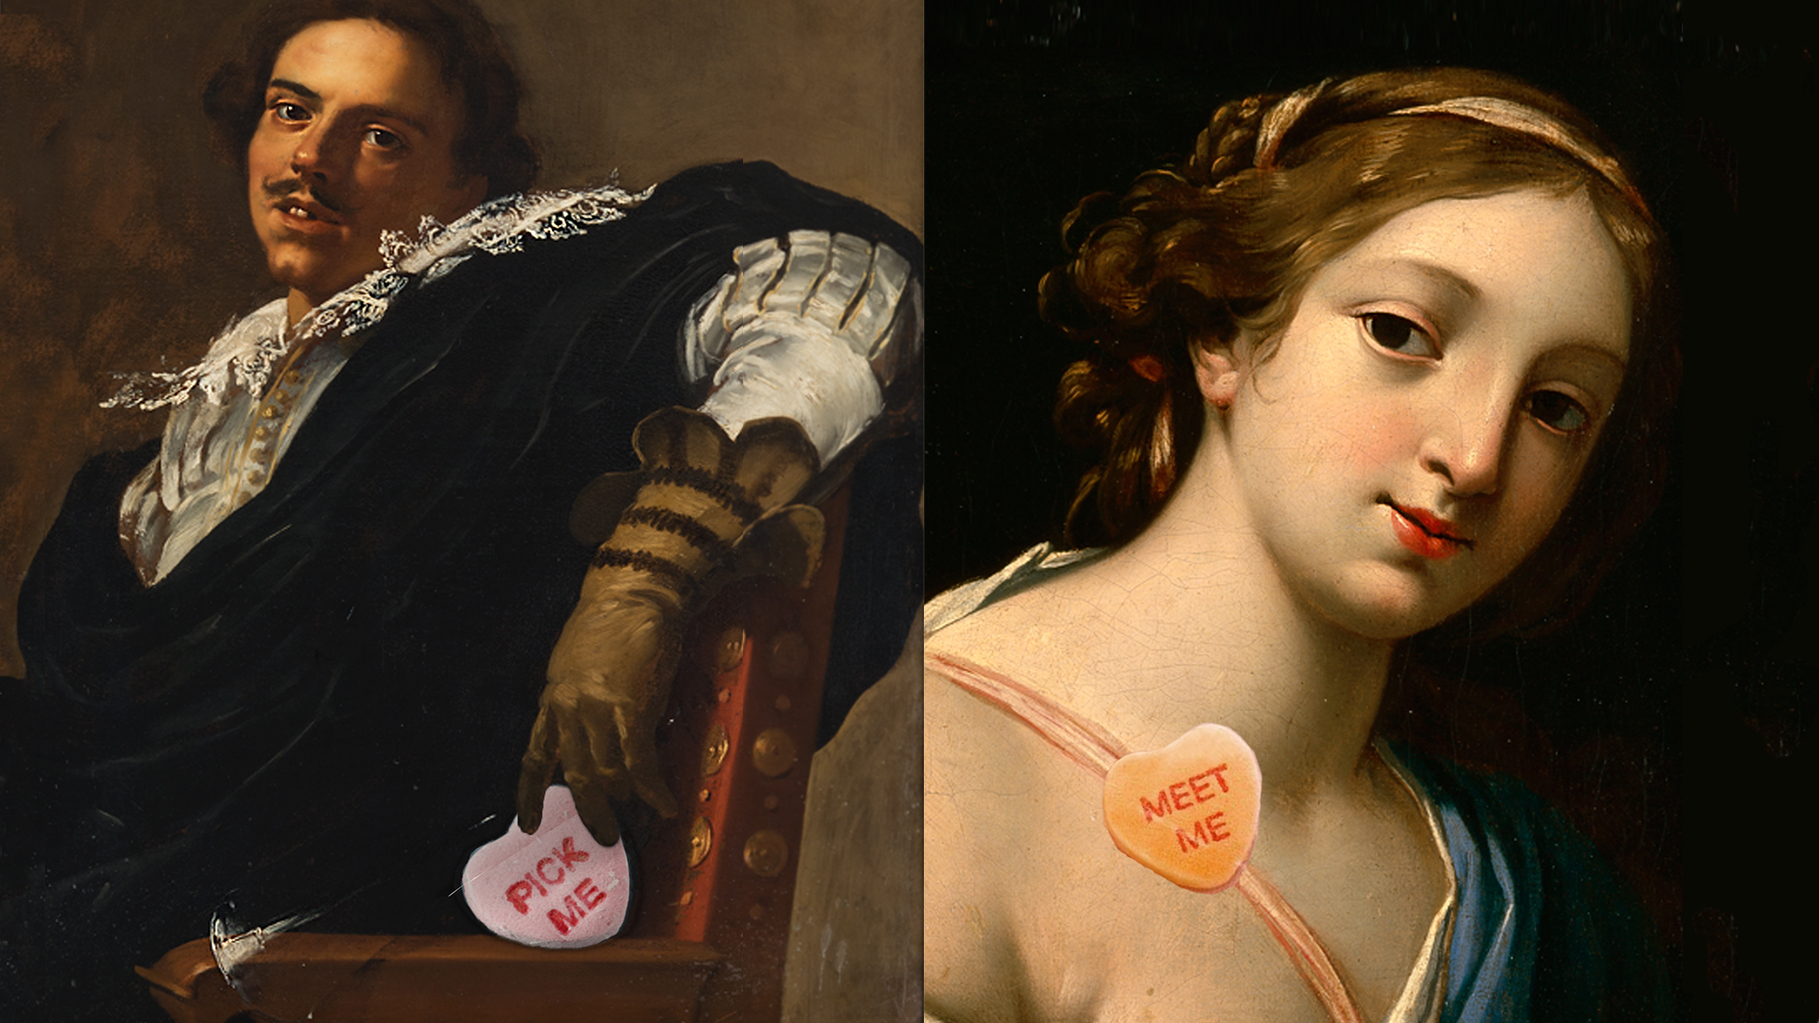 Grid of two paintings, one man on a chair and another of a woman's portrait with sweethearts candies